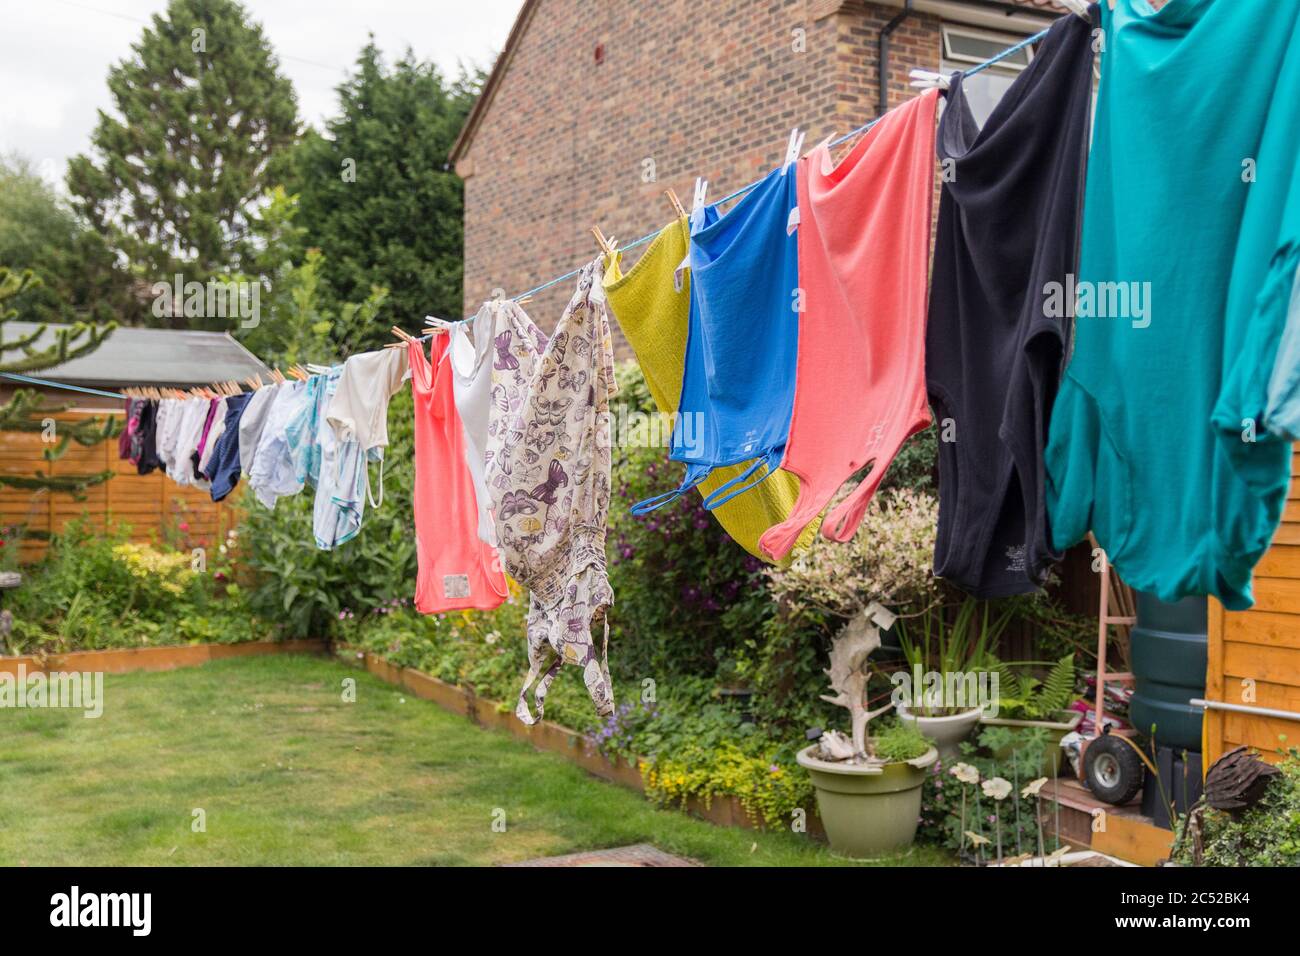 Washing hanging on long line drying in the gusty windy weather. Full length of my garden taken up with washing drying and blowing around end to end. Stock Photo